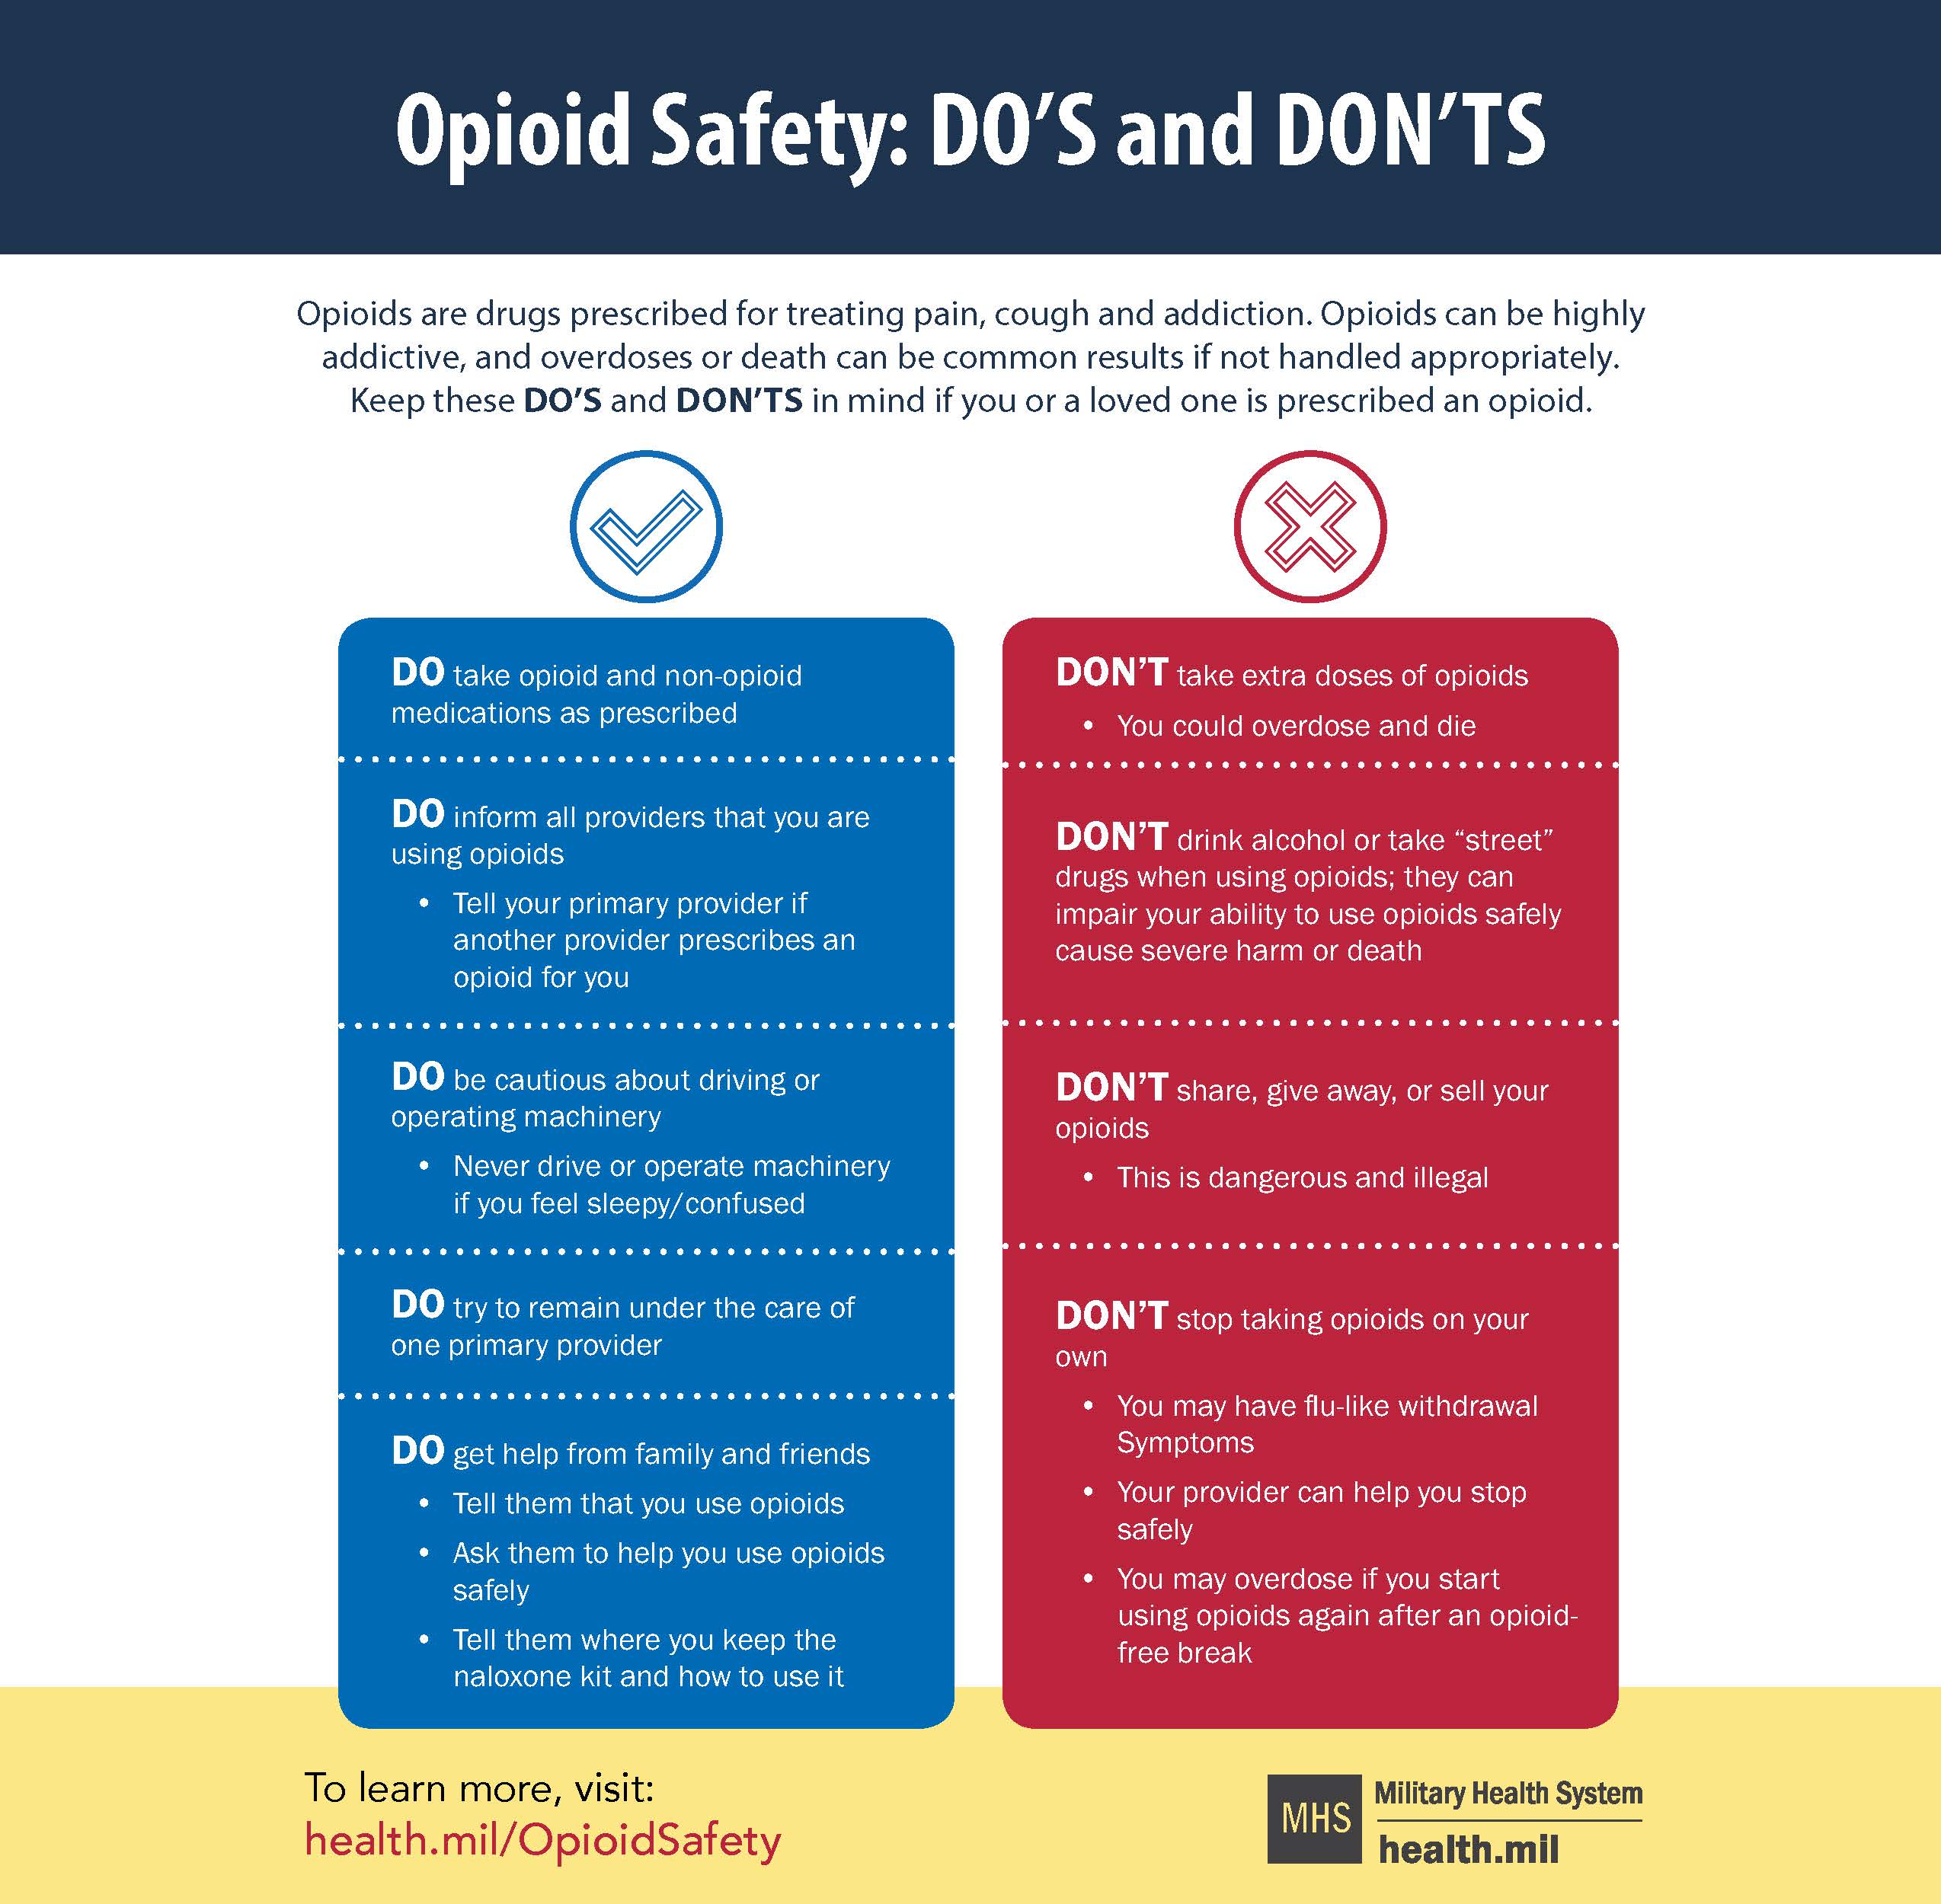 This infographic provides a list of do's and don'ts if you or a loved one is prescribed an opioid. 